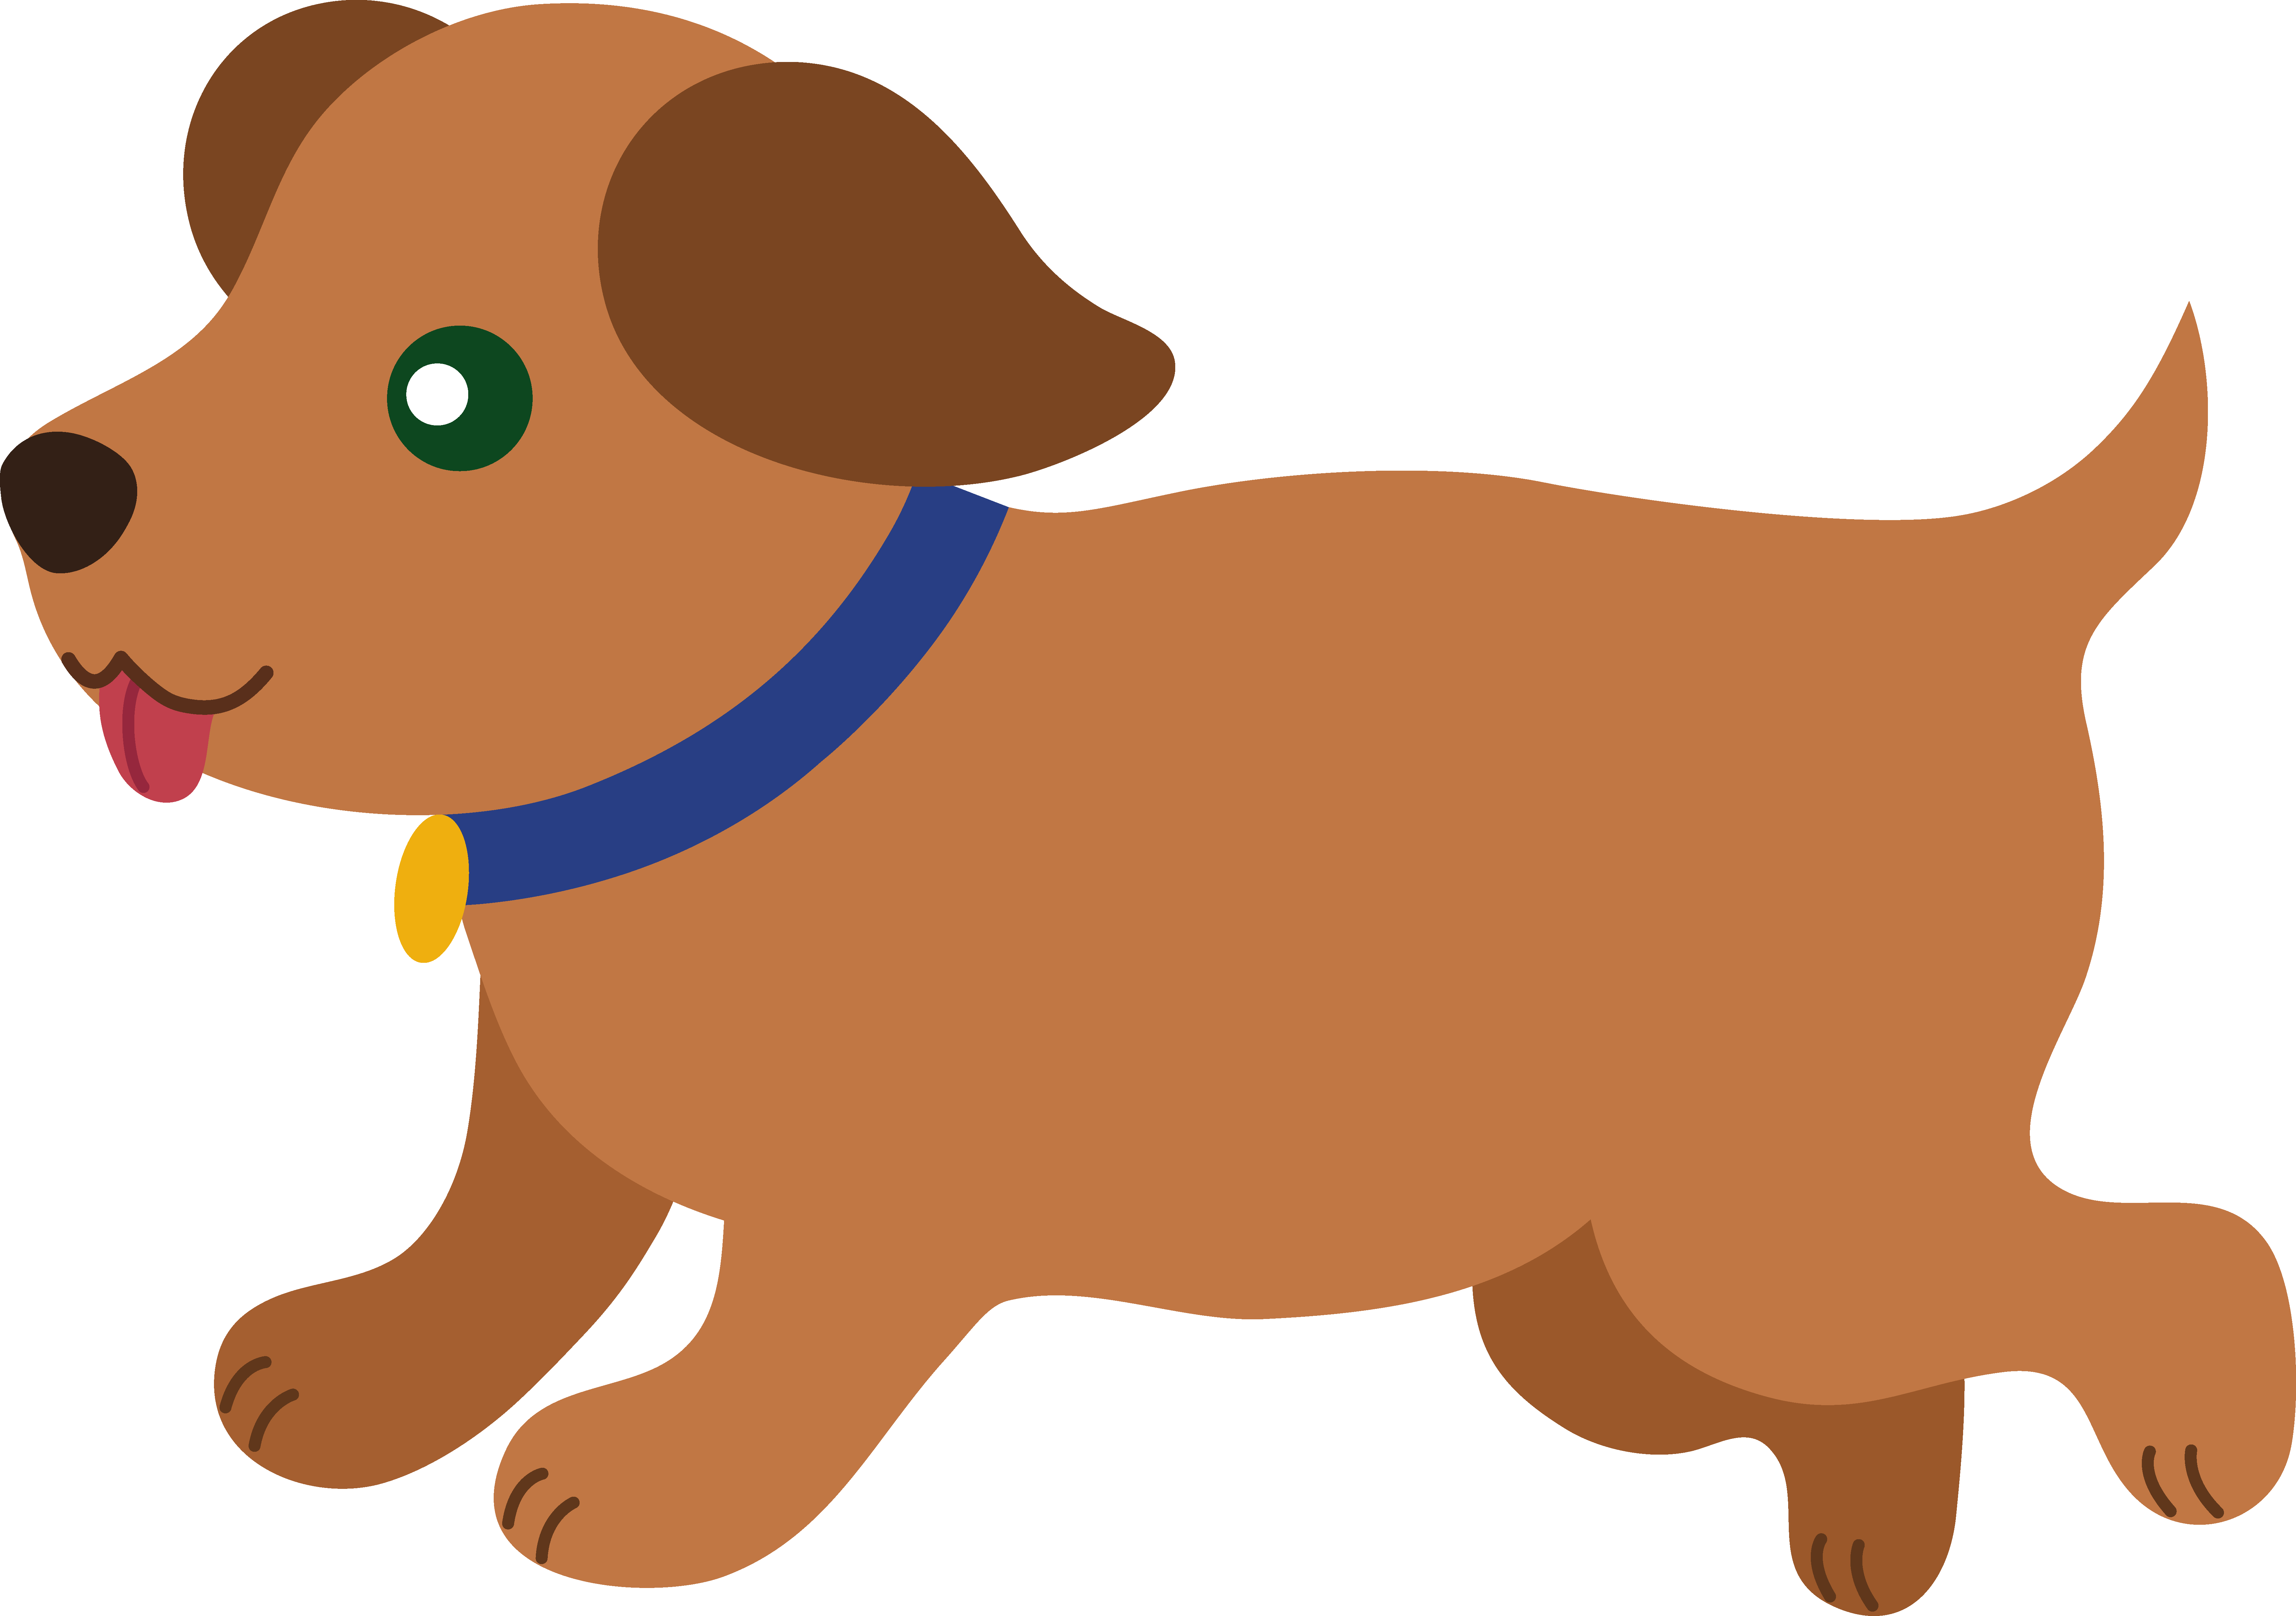 Puppy Dog Clipart Size: 78 Kb